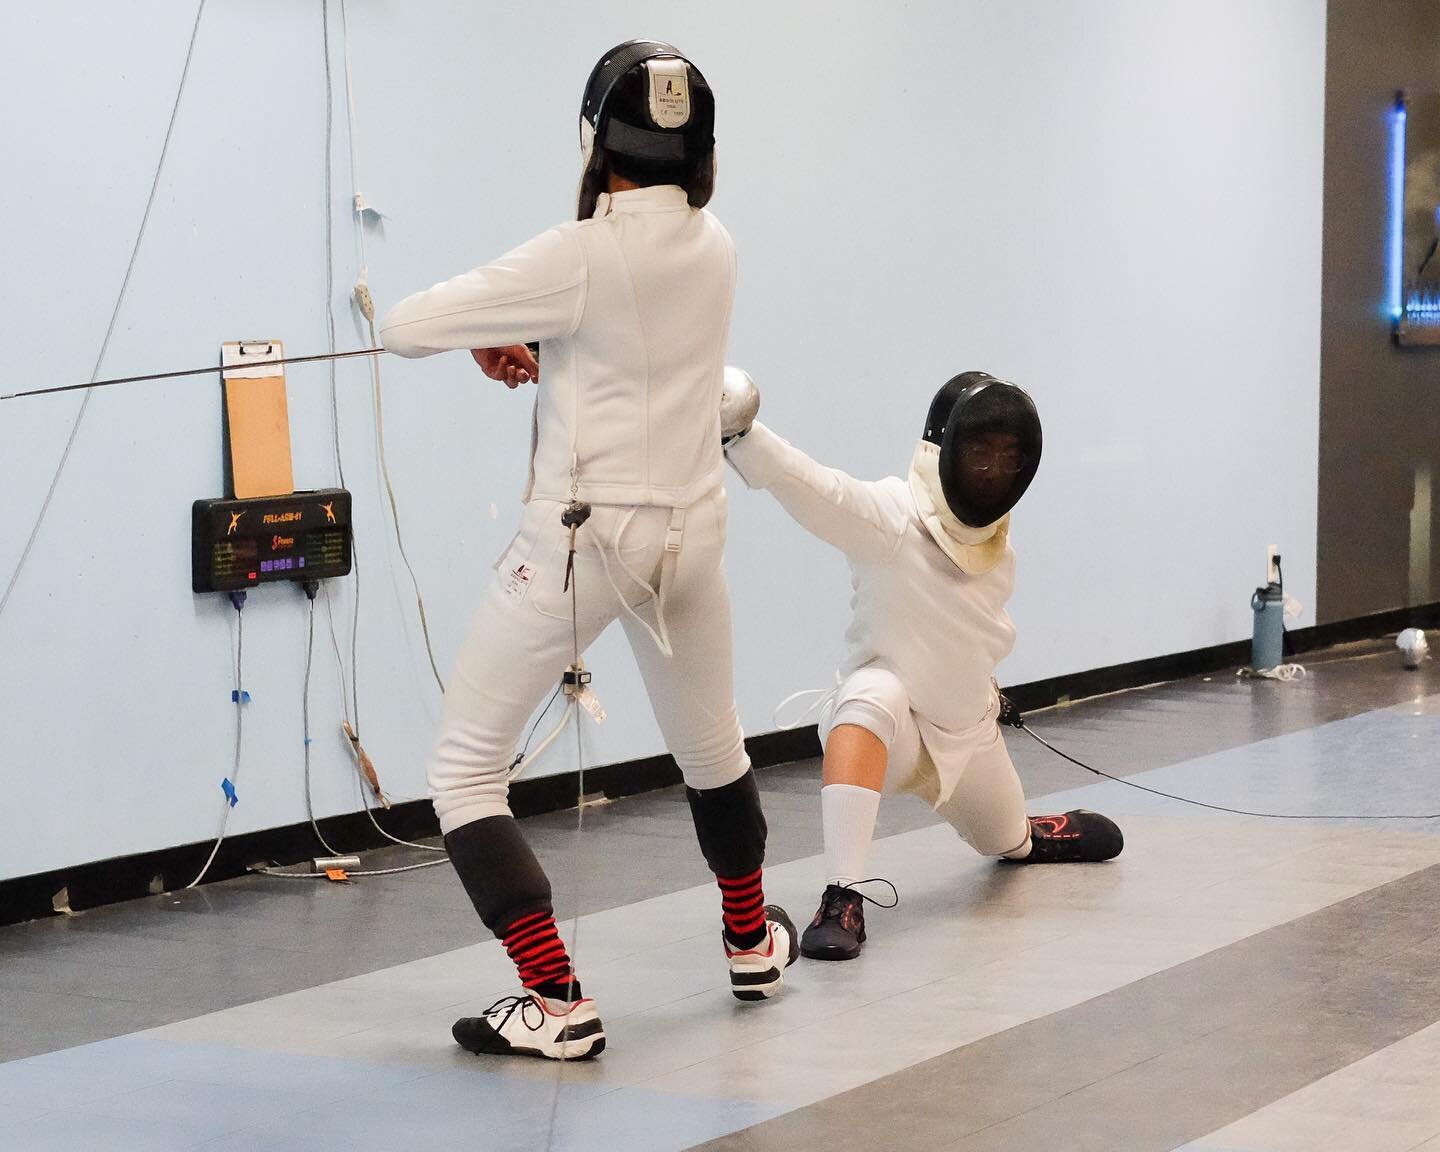 Some more shots from the E &amp; Under Epee! #fencing #epee #epeefencing #escrime #manchen #manchenfencing #manchenfridaynight #foilfencing #sabrefencing